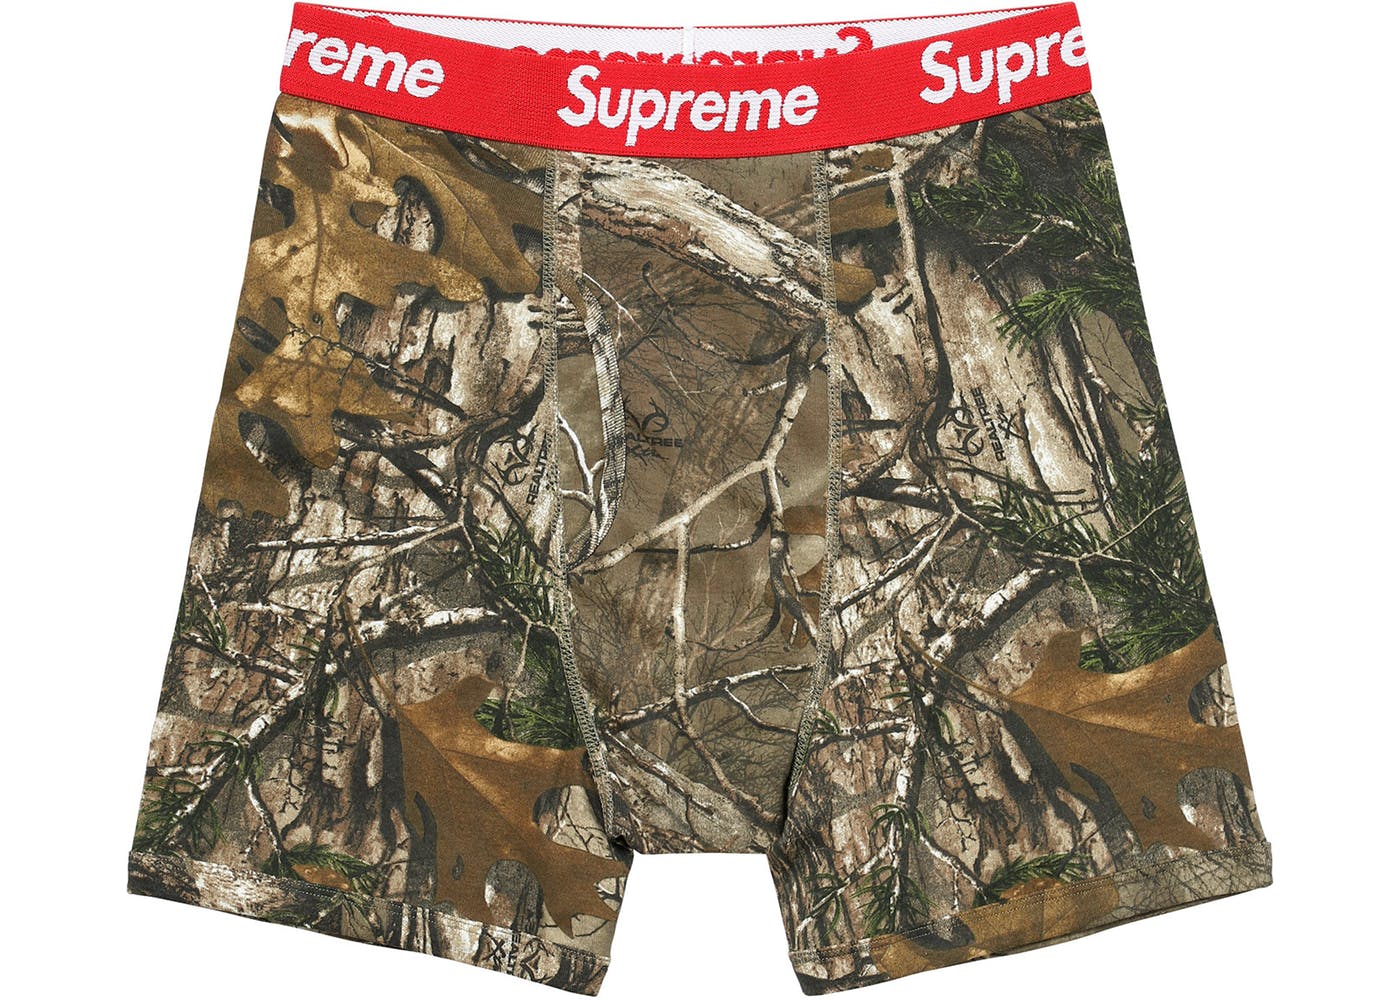 https://images-wp.stockx.com/news/wp-content/uploads/2017/12/Supreme-Hanes-Realtree-Boxer-Briefs-2-Pack-Woodbine.jpg